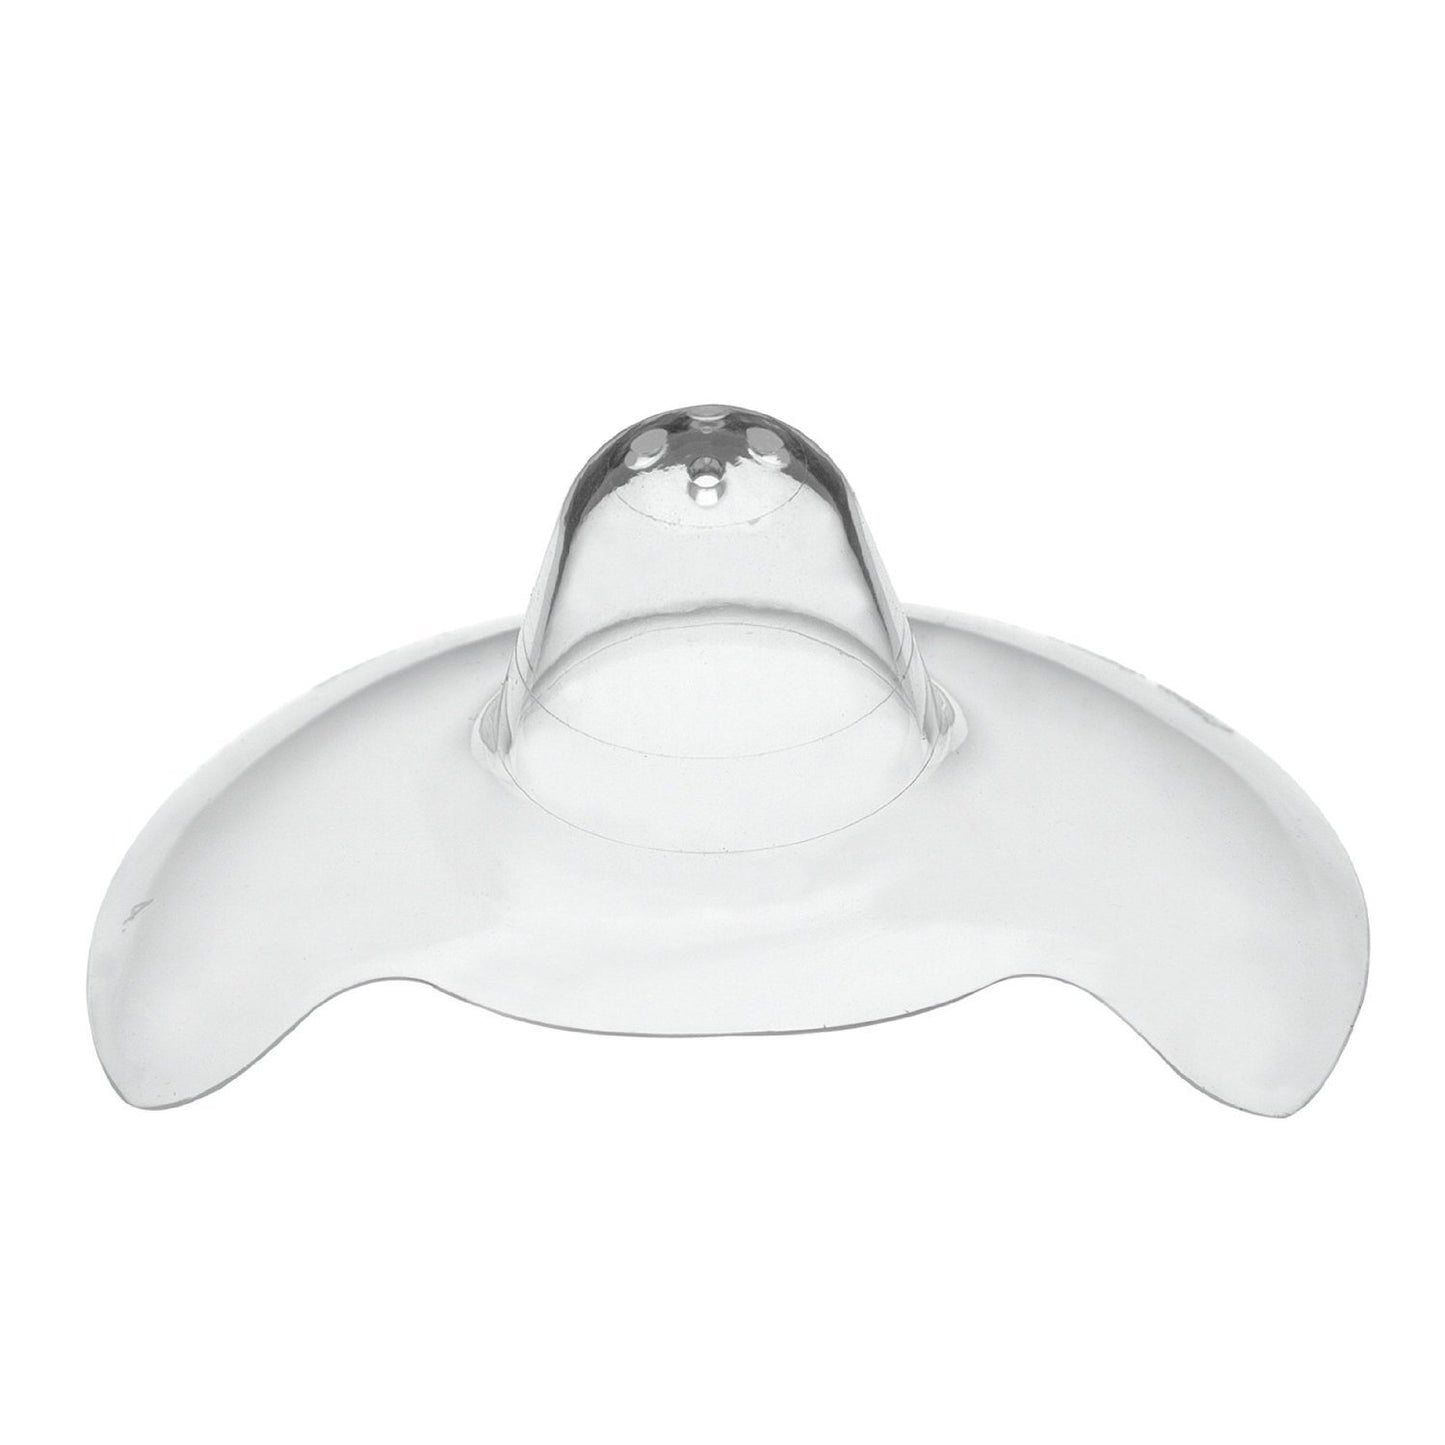 Medela Contact Nipple Shield, Small 20mm (2 Pack)